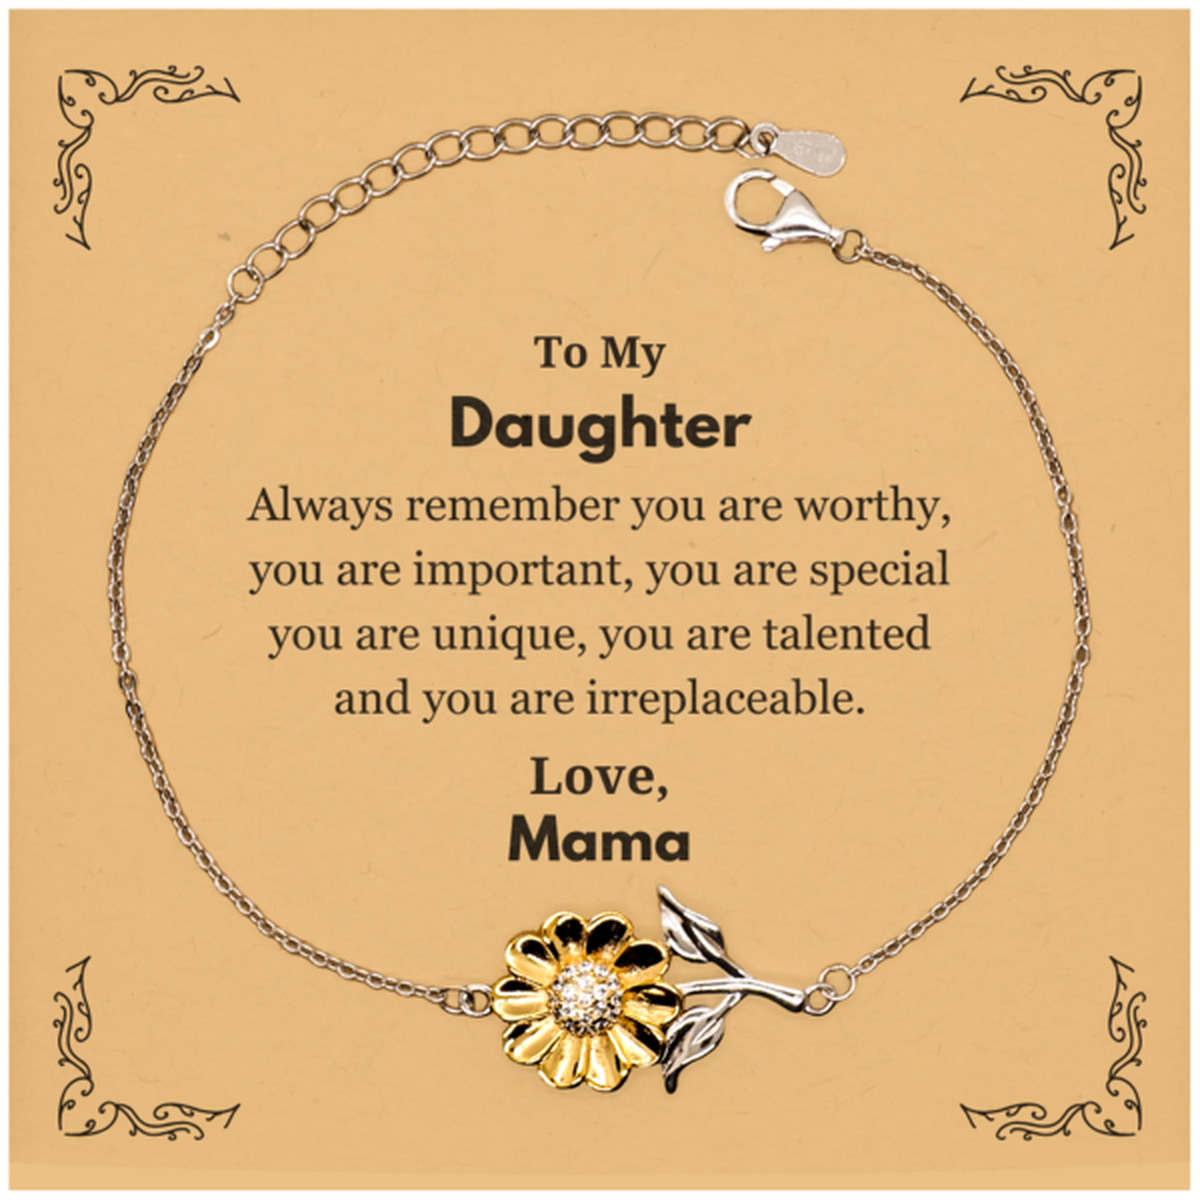 Daughter Birthday Gifts from Mama, Inspirational Sunflower Bracelet for Daughter Christmas Graduation Gifts for Daughter Always remember you are worthy, you are important. Love, Mama